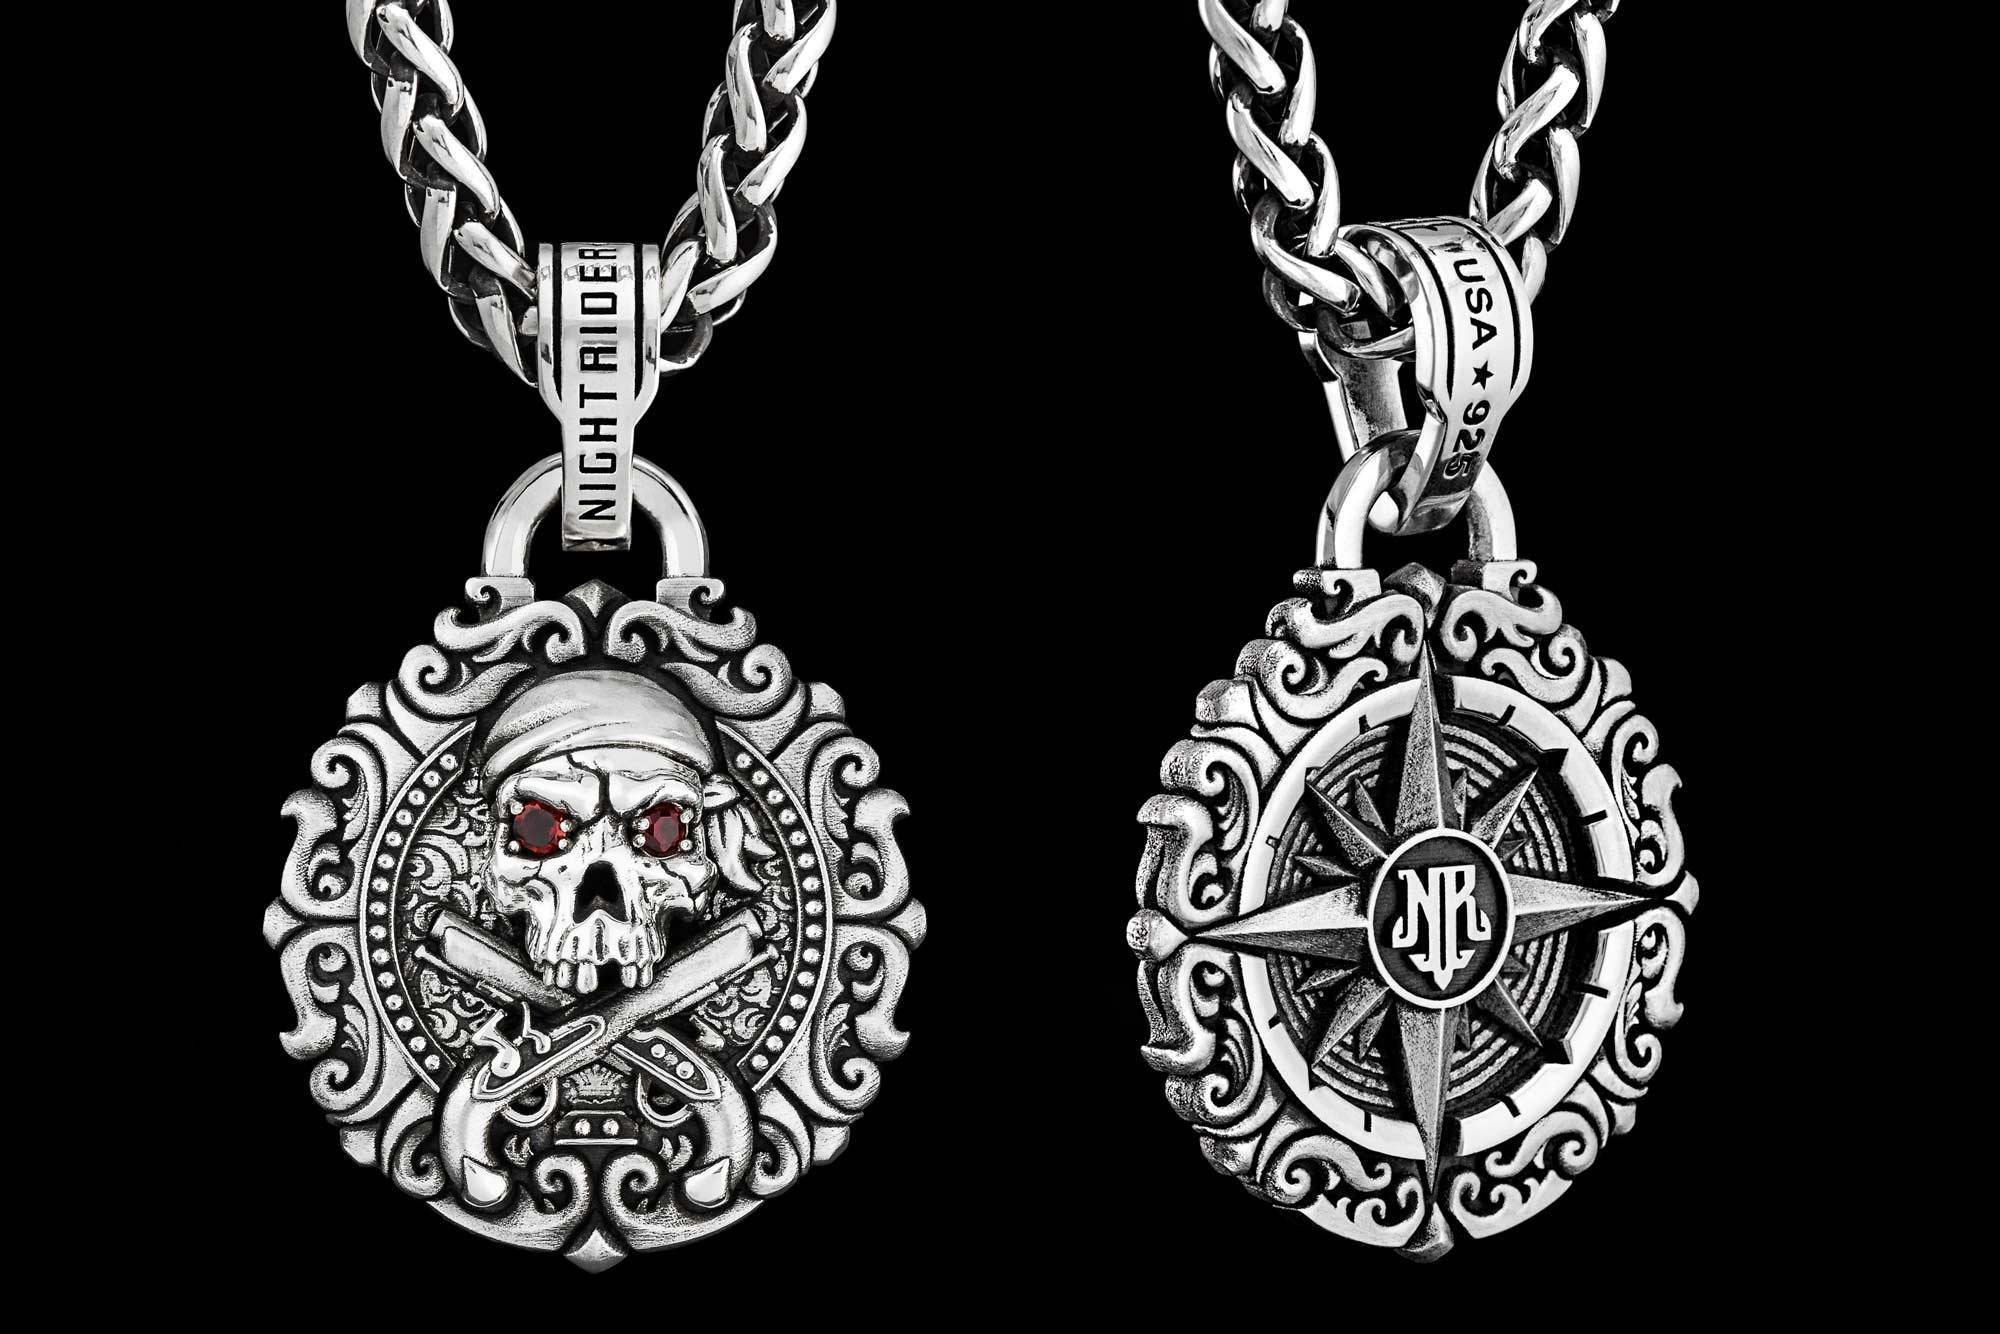 Old Salt Pendant by NightRider Jewelry - Front and Back